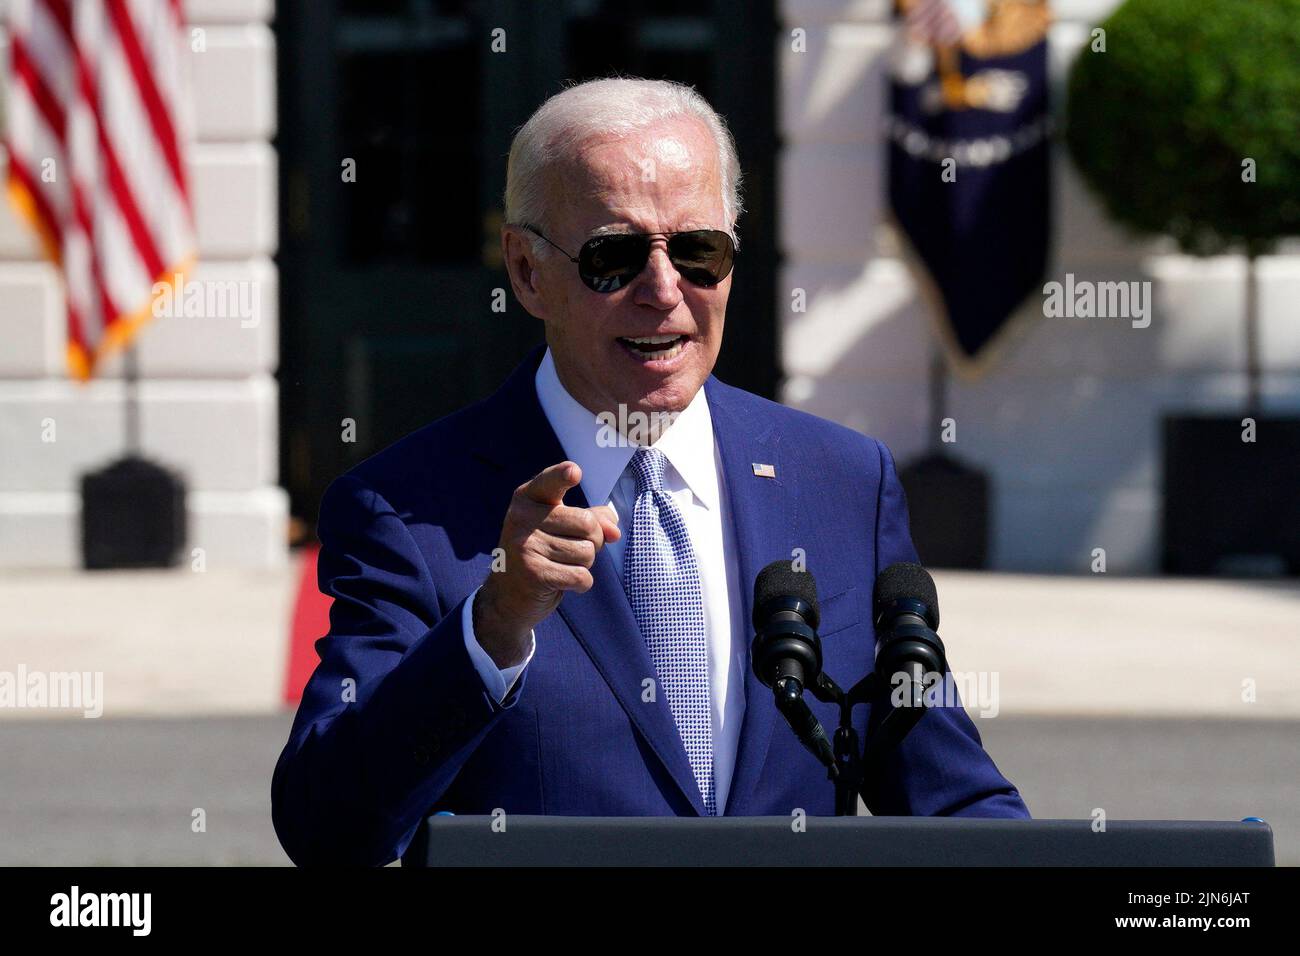 U.S. President Joe Biden delivers remarks and sign into law the CHIPS and Science Act during a ceremony on the South Lawn of the White House in Washington on August 9, 2022. Photo by Yuri Gripas/ABACAPRESS.COM Stock Photo